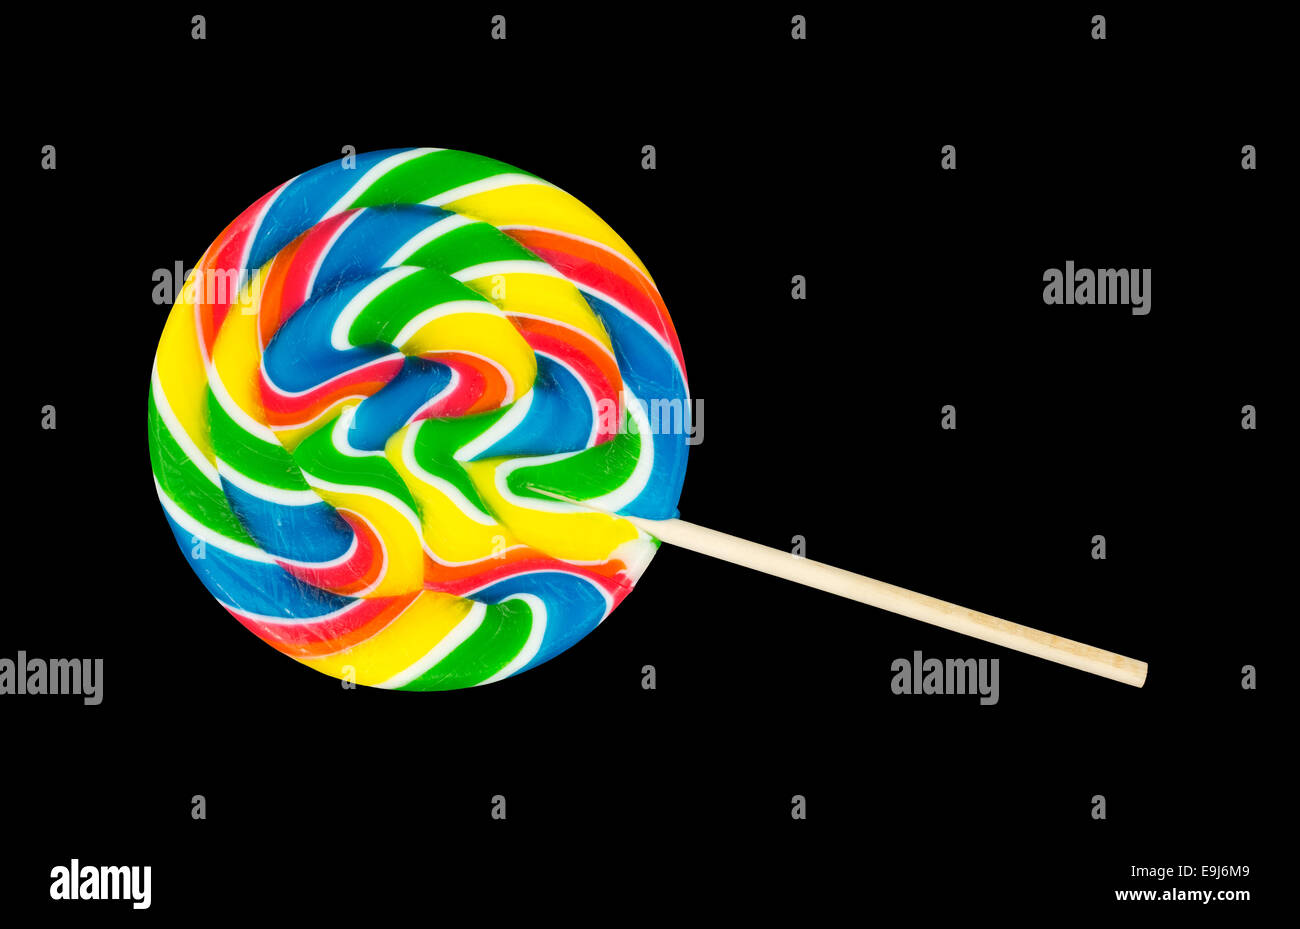 A large colorful lollipop with a wood stick handle on a black background. Stock Photo